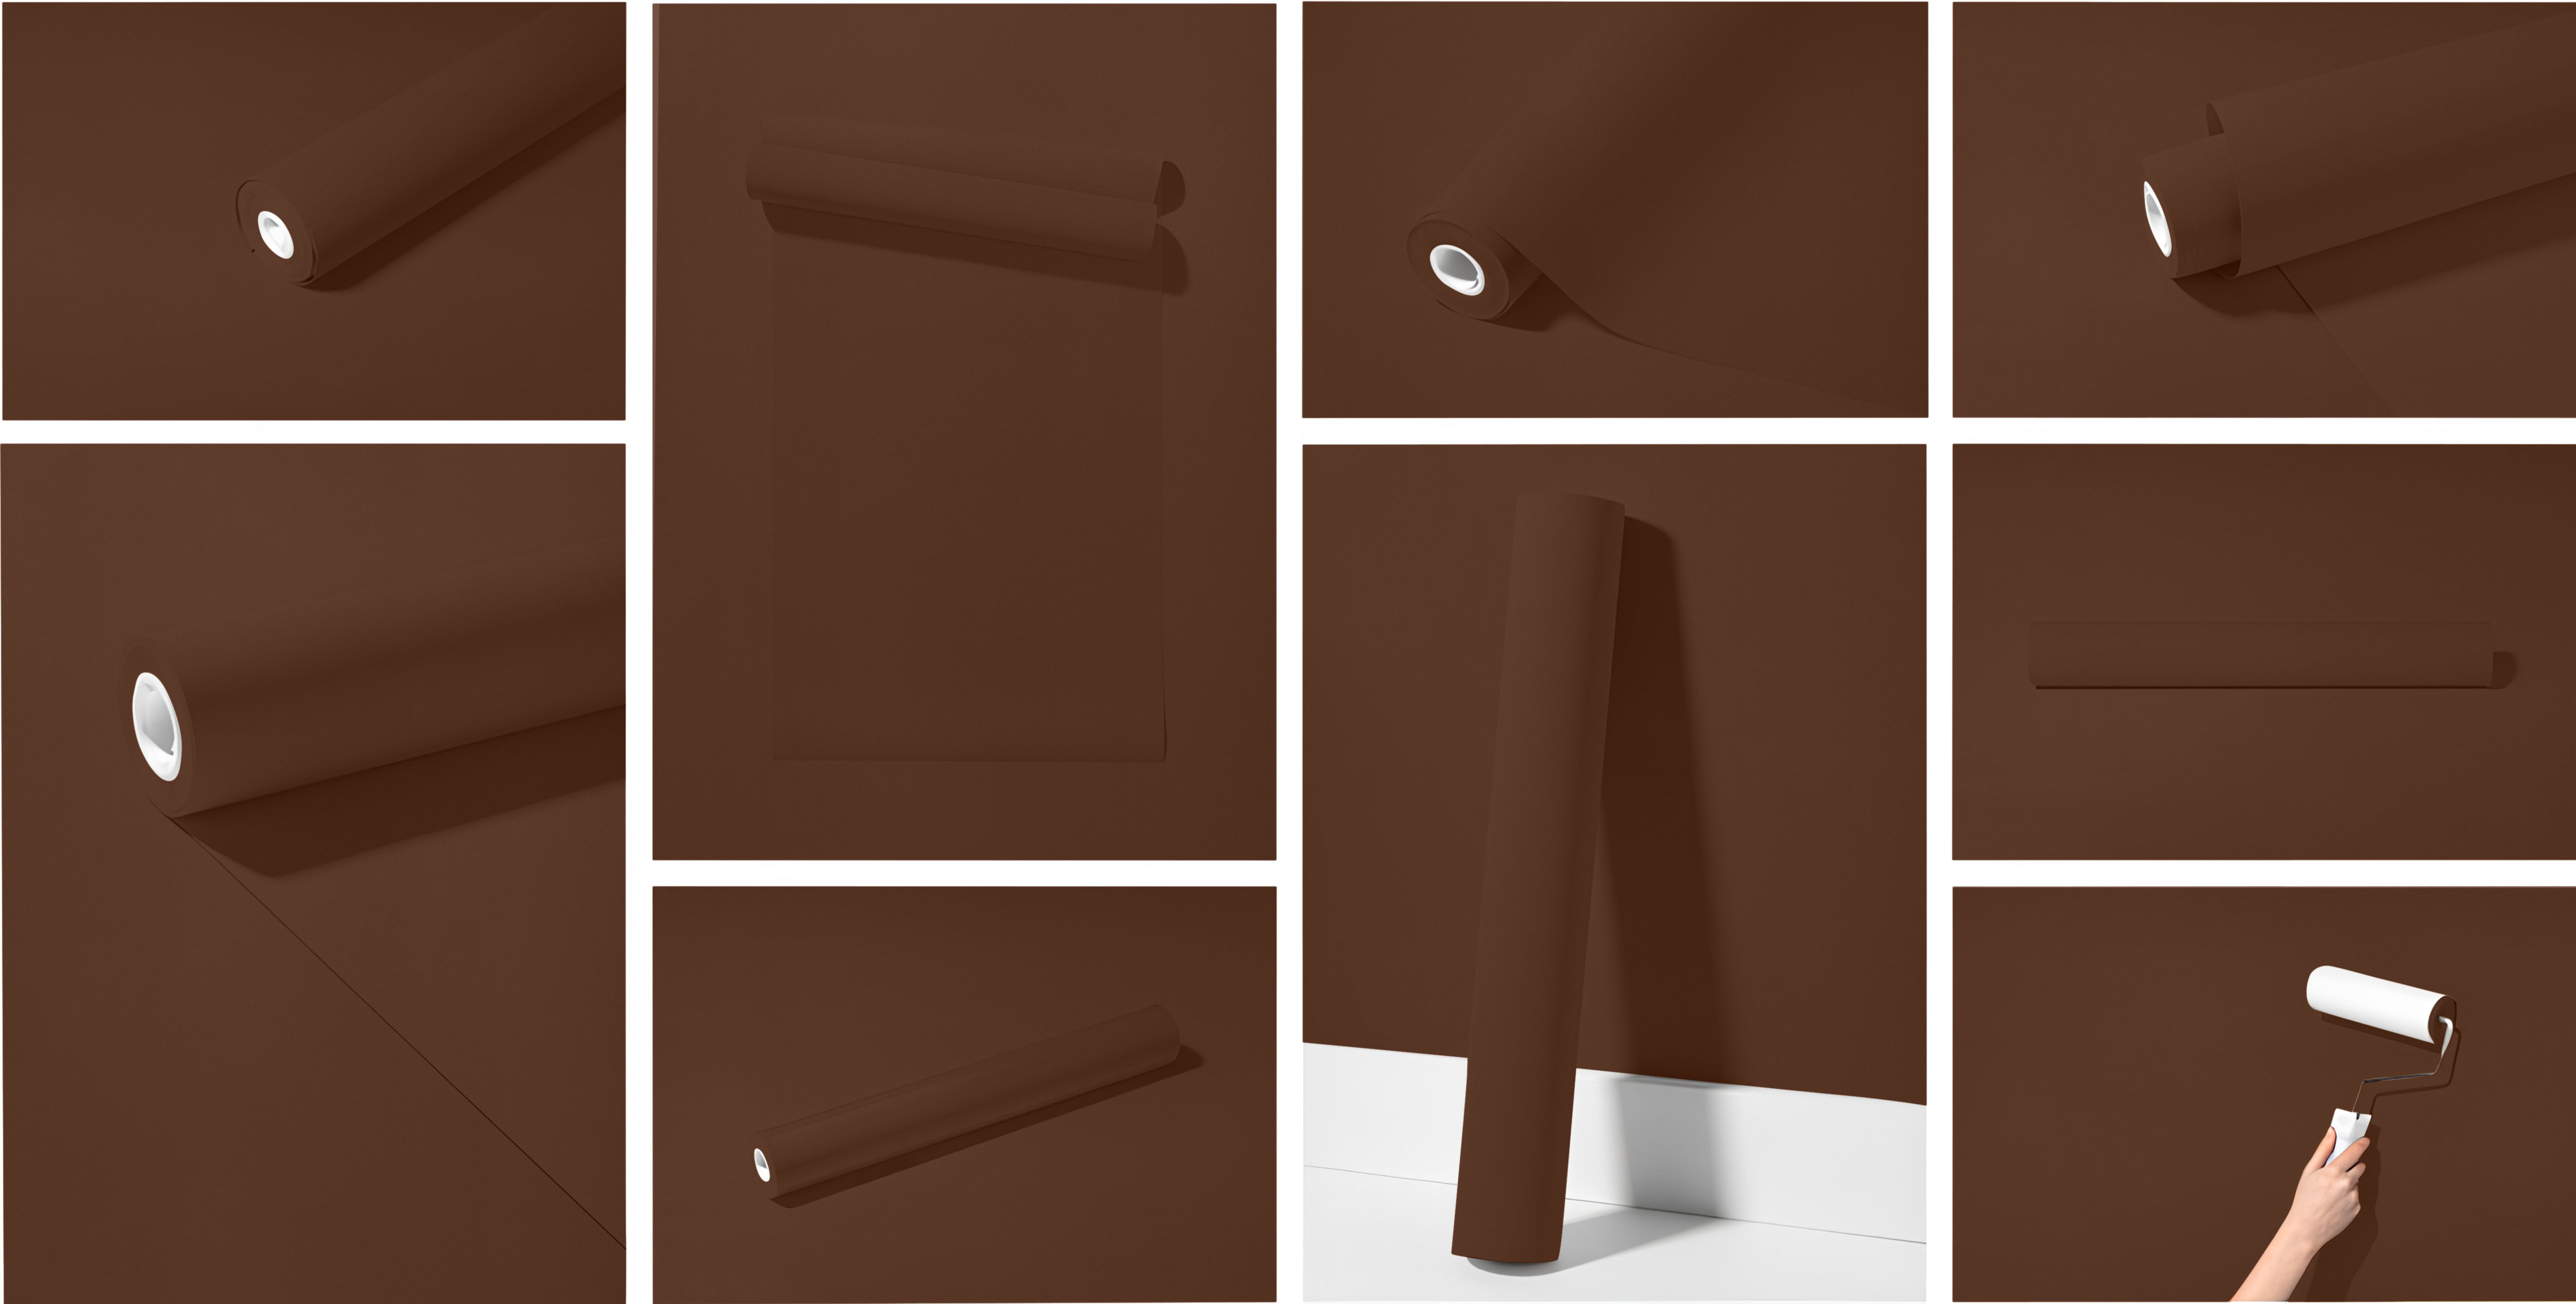 Peel & Stick Removable Re-usable Paint - Color RAL 8011 Nut Brown - offRAL™ - RALRAW LLC, USA